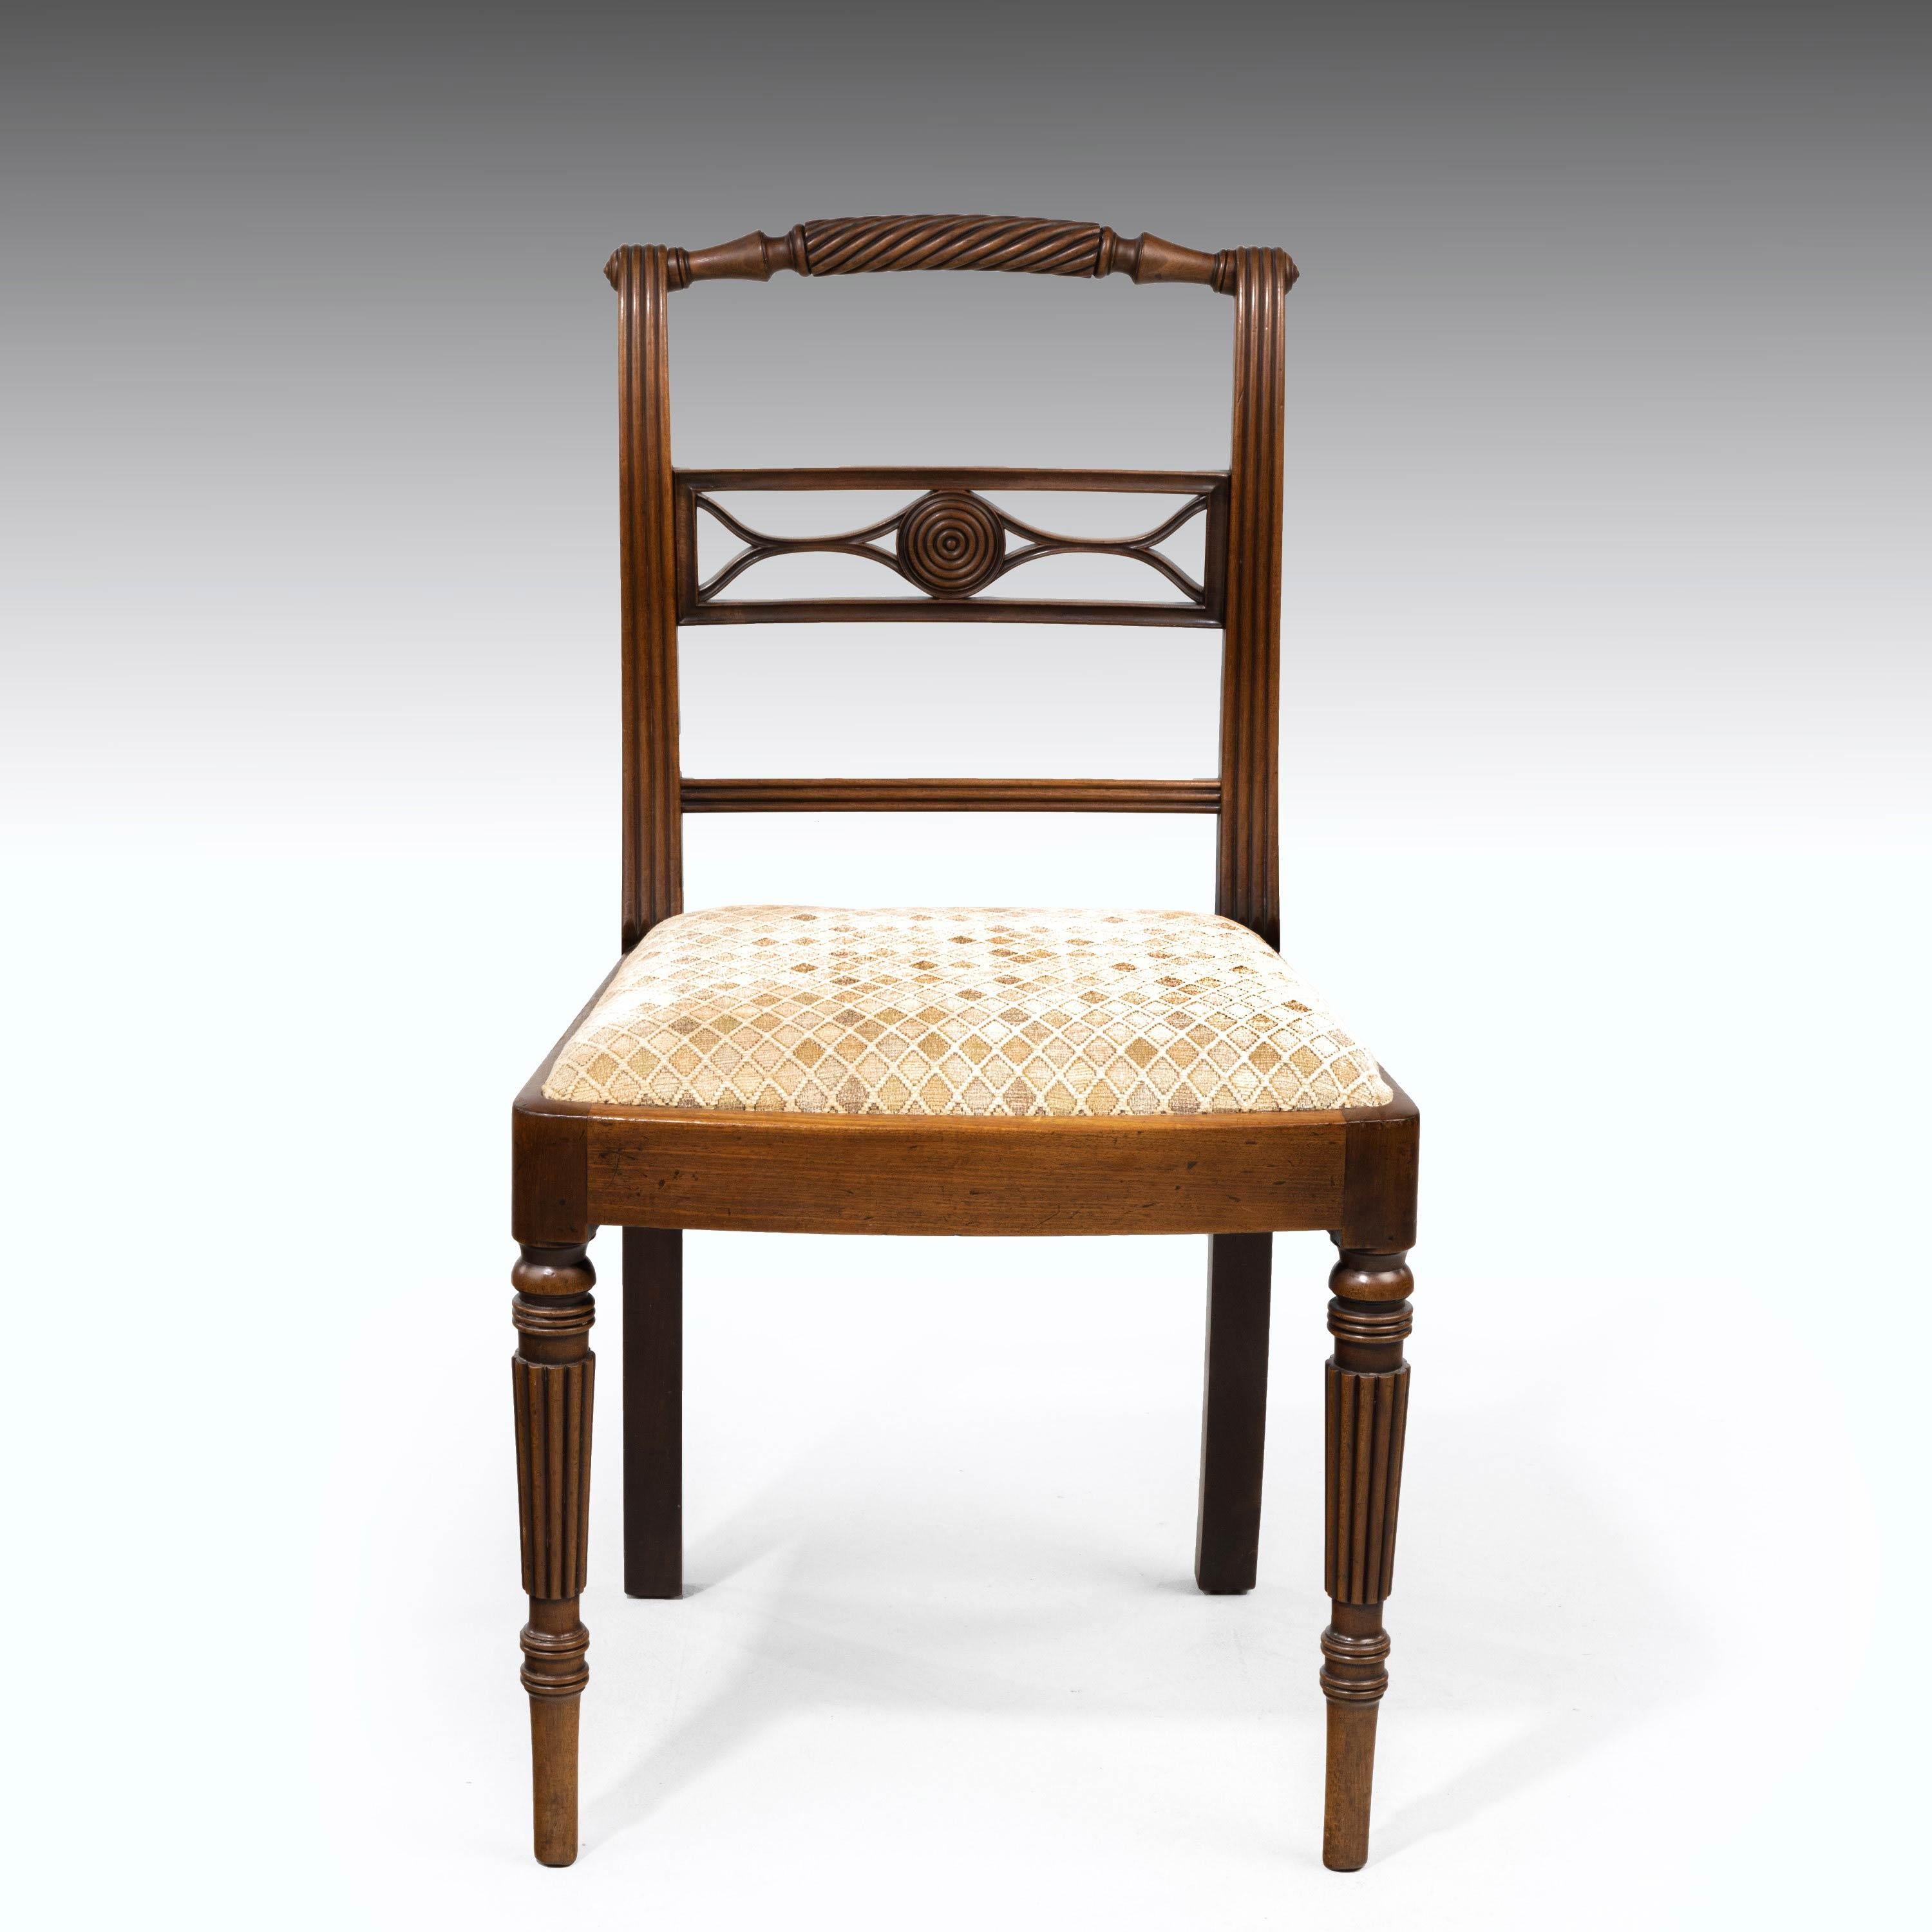 An elegant set of four Whitehaven Regency period single chairs. With finely carved details including a raised rope twist section to the top. Reeding all the way down the uprights. Bow seats and finely chamfered supports. In excellent overall